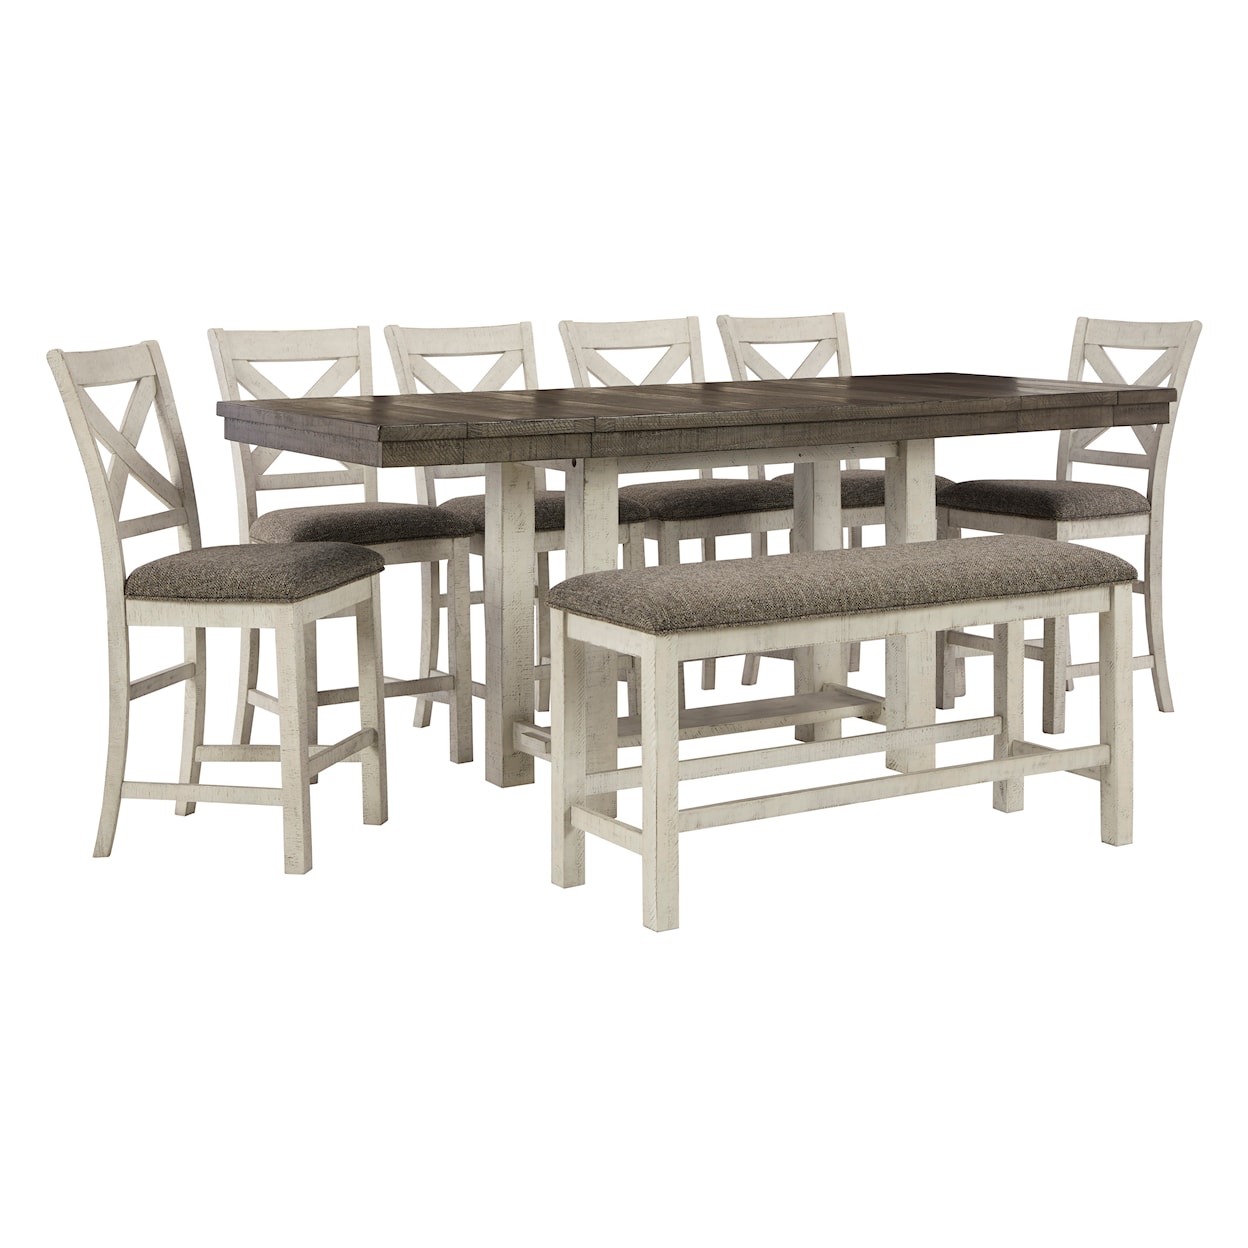 Benchcraft Brewgan 8-Piece Dining Set with Bench